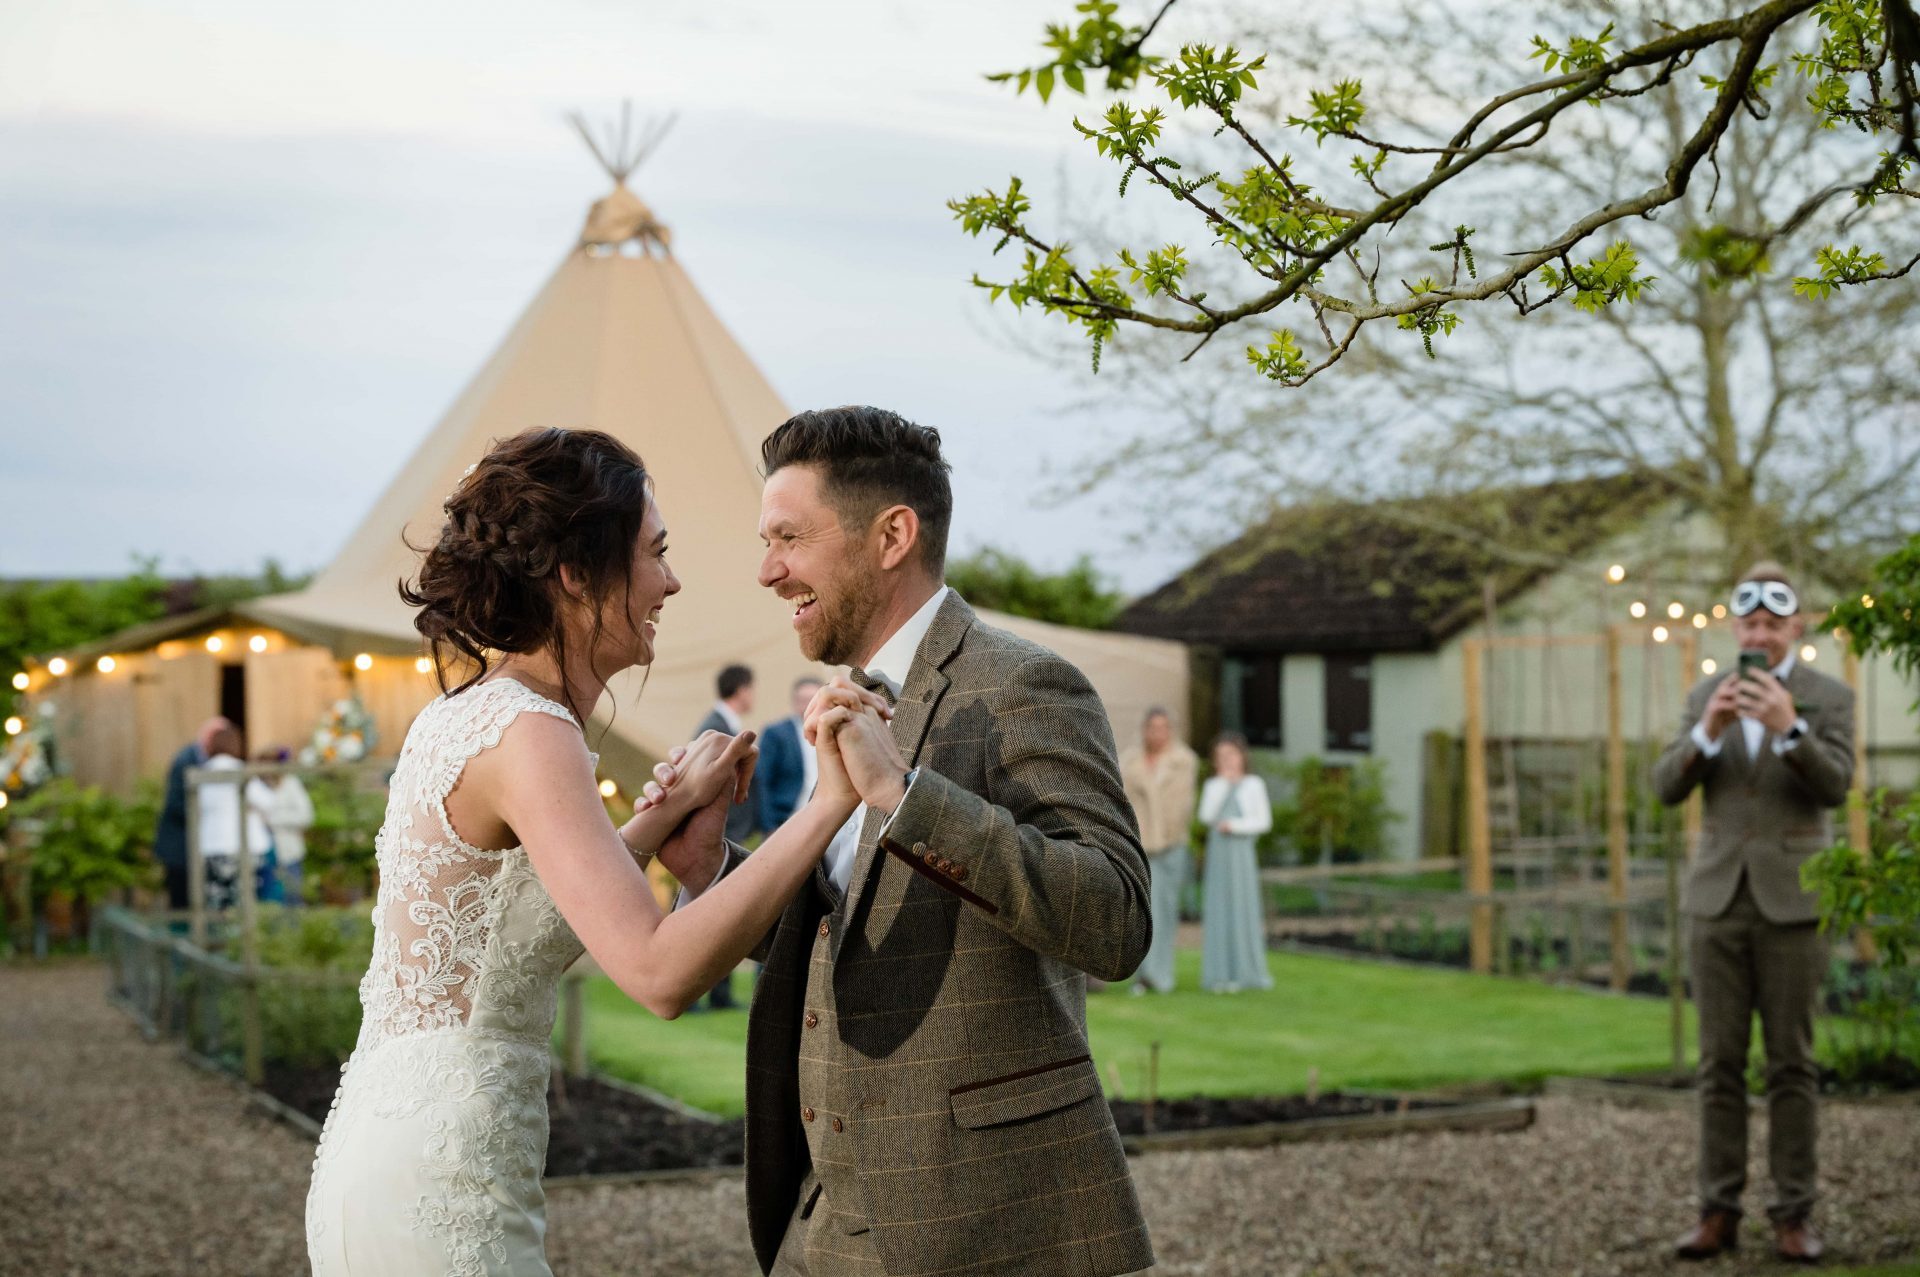 Outdoor first dance at Hill Farm House in Brigstock